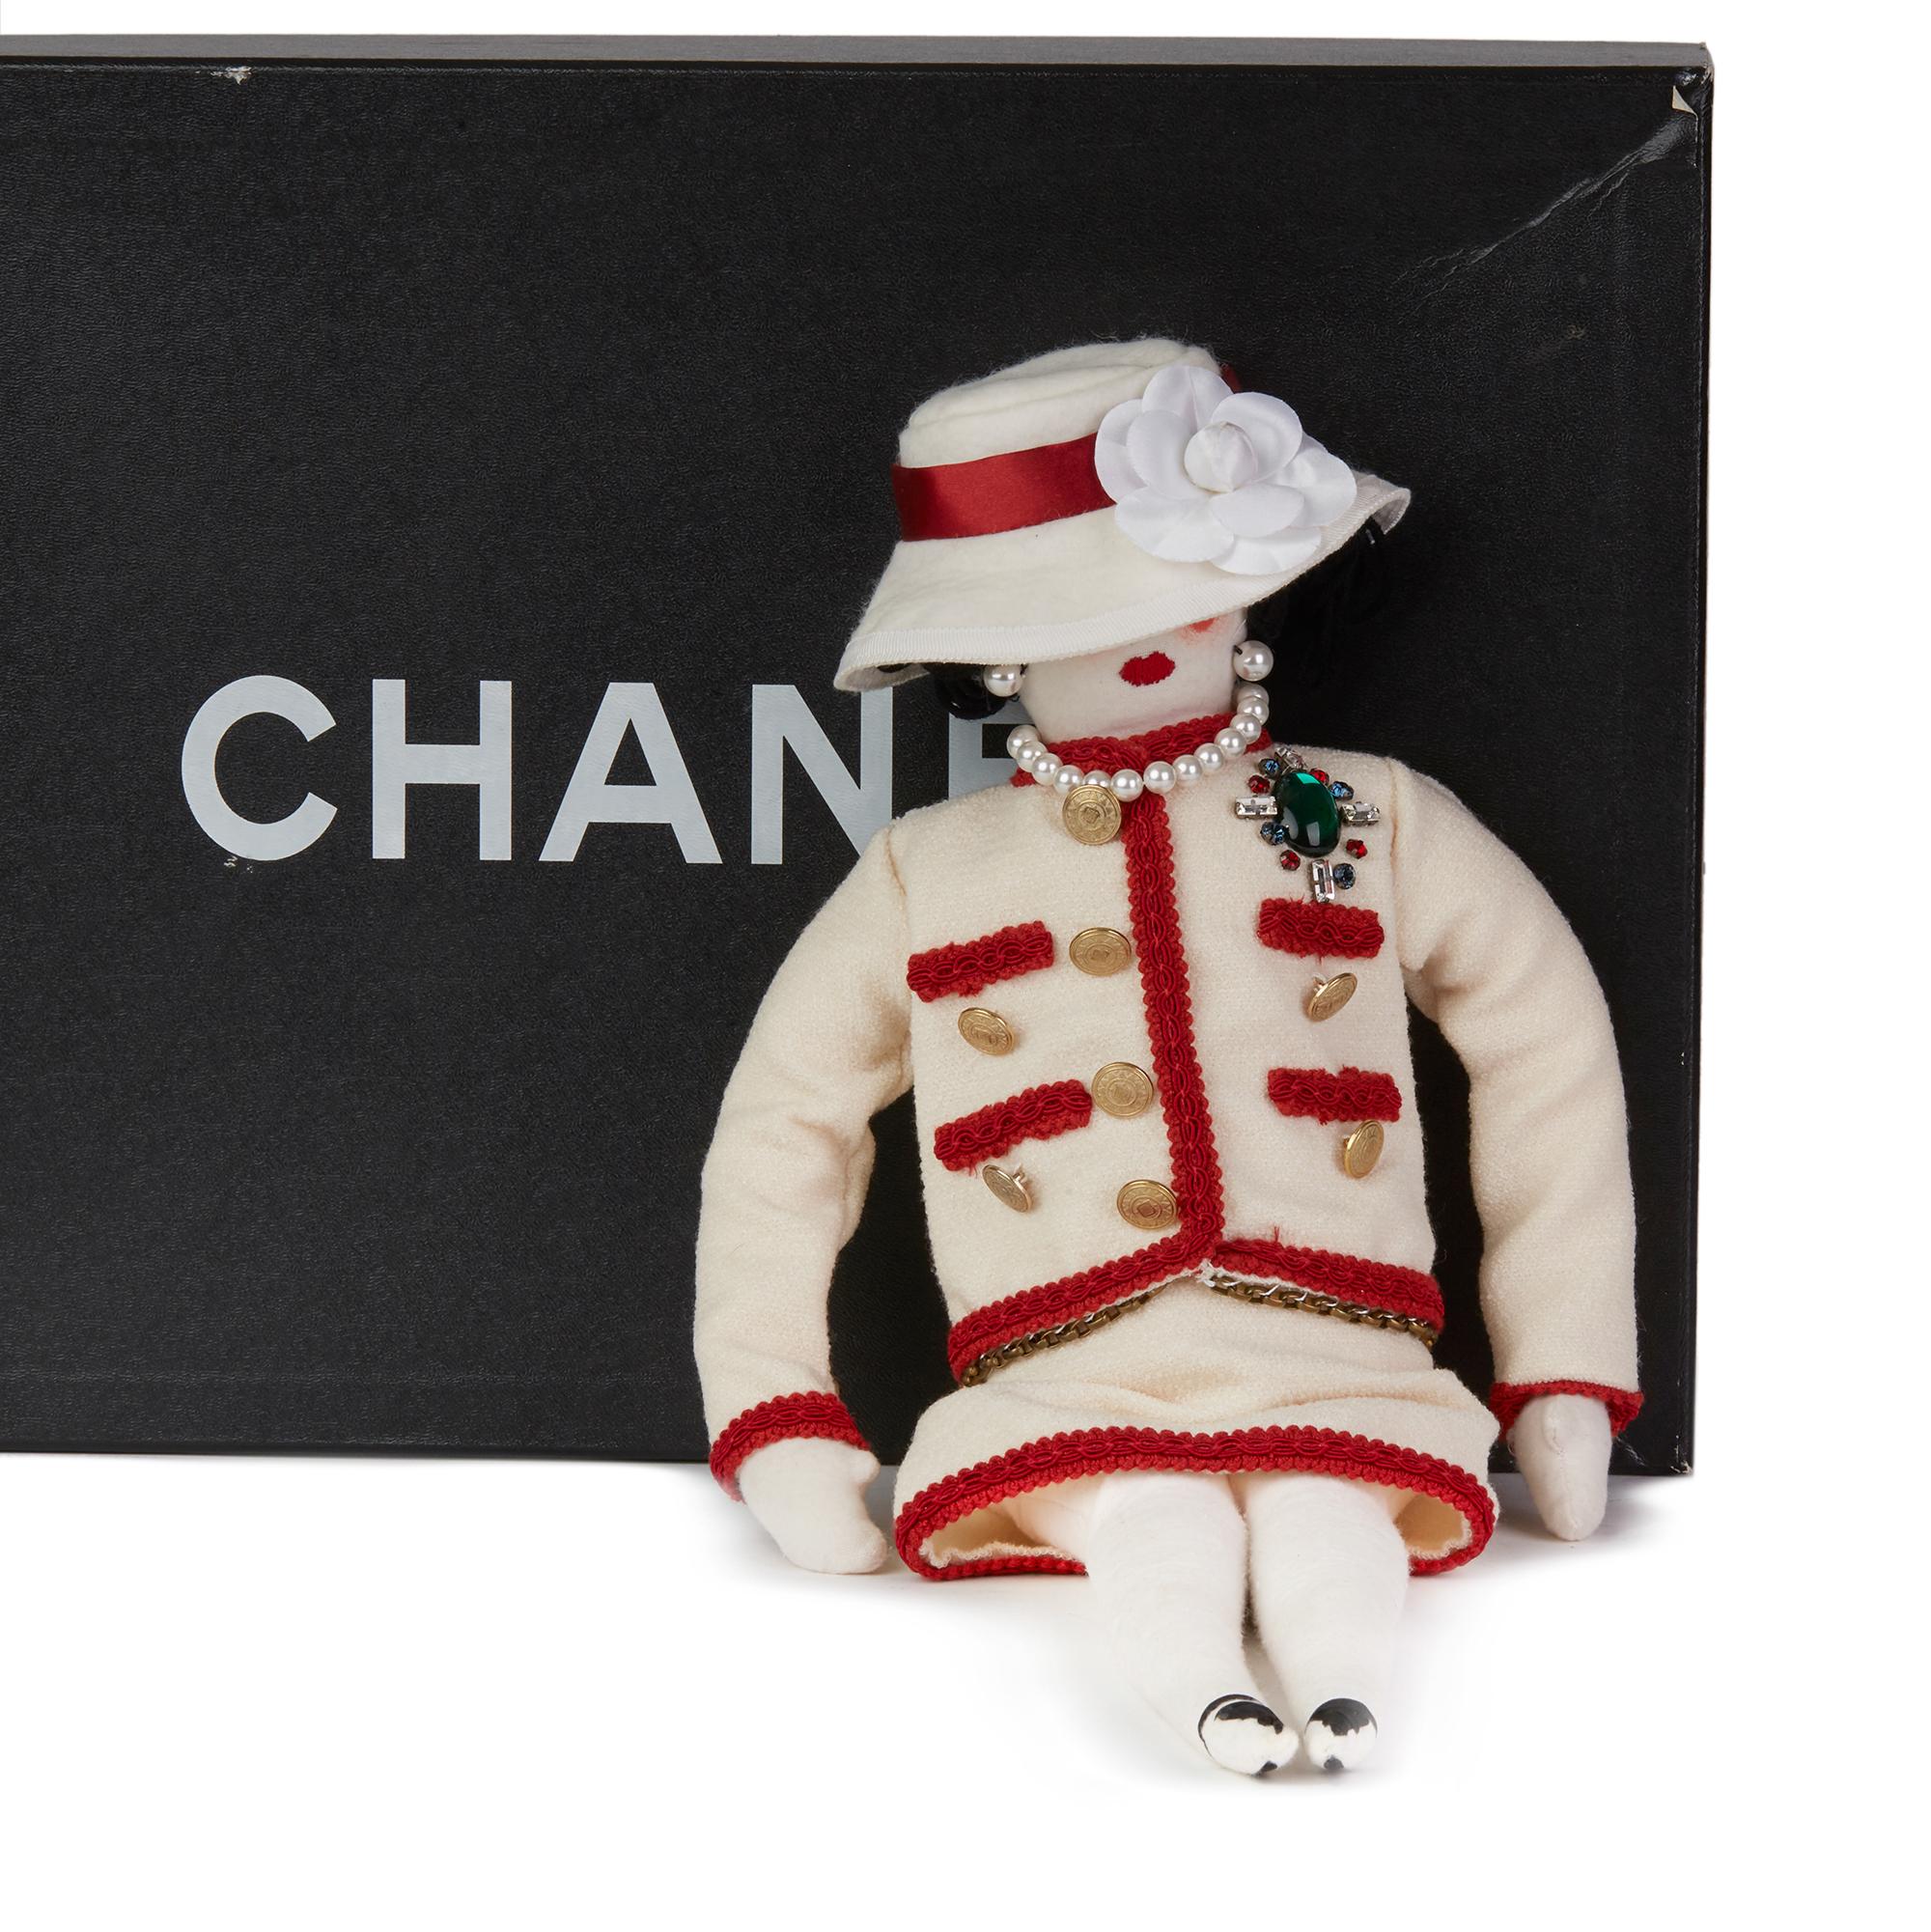 2010 Chanel Fabric Coco Madamoiselle Doll by Karl Largerfeld 3